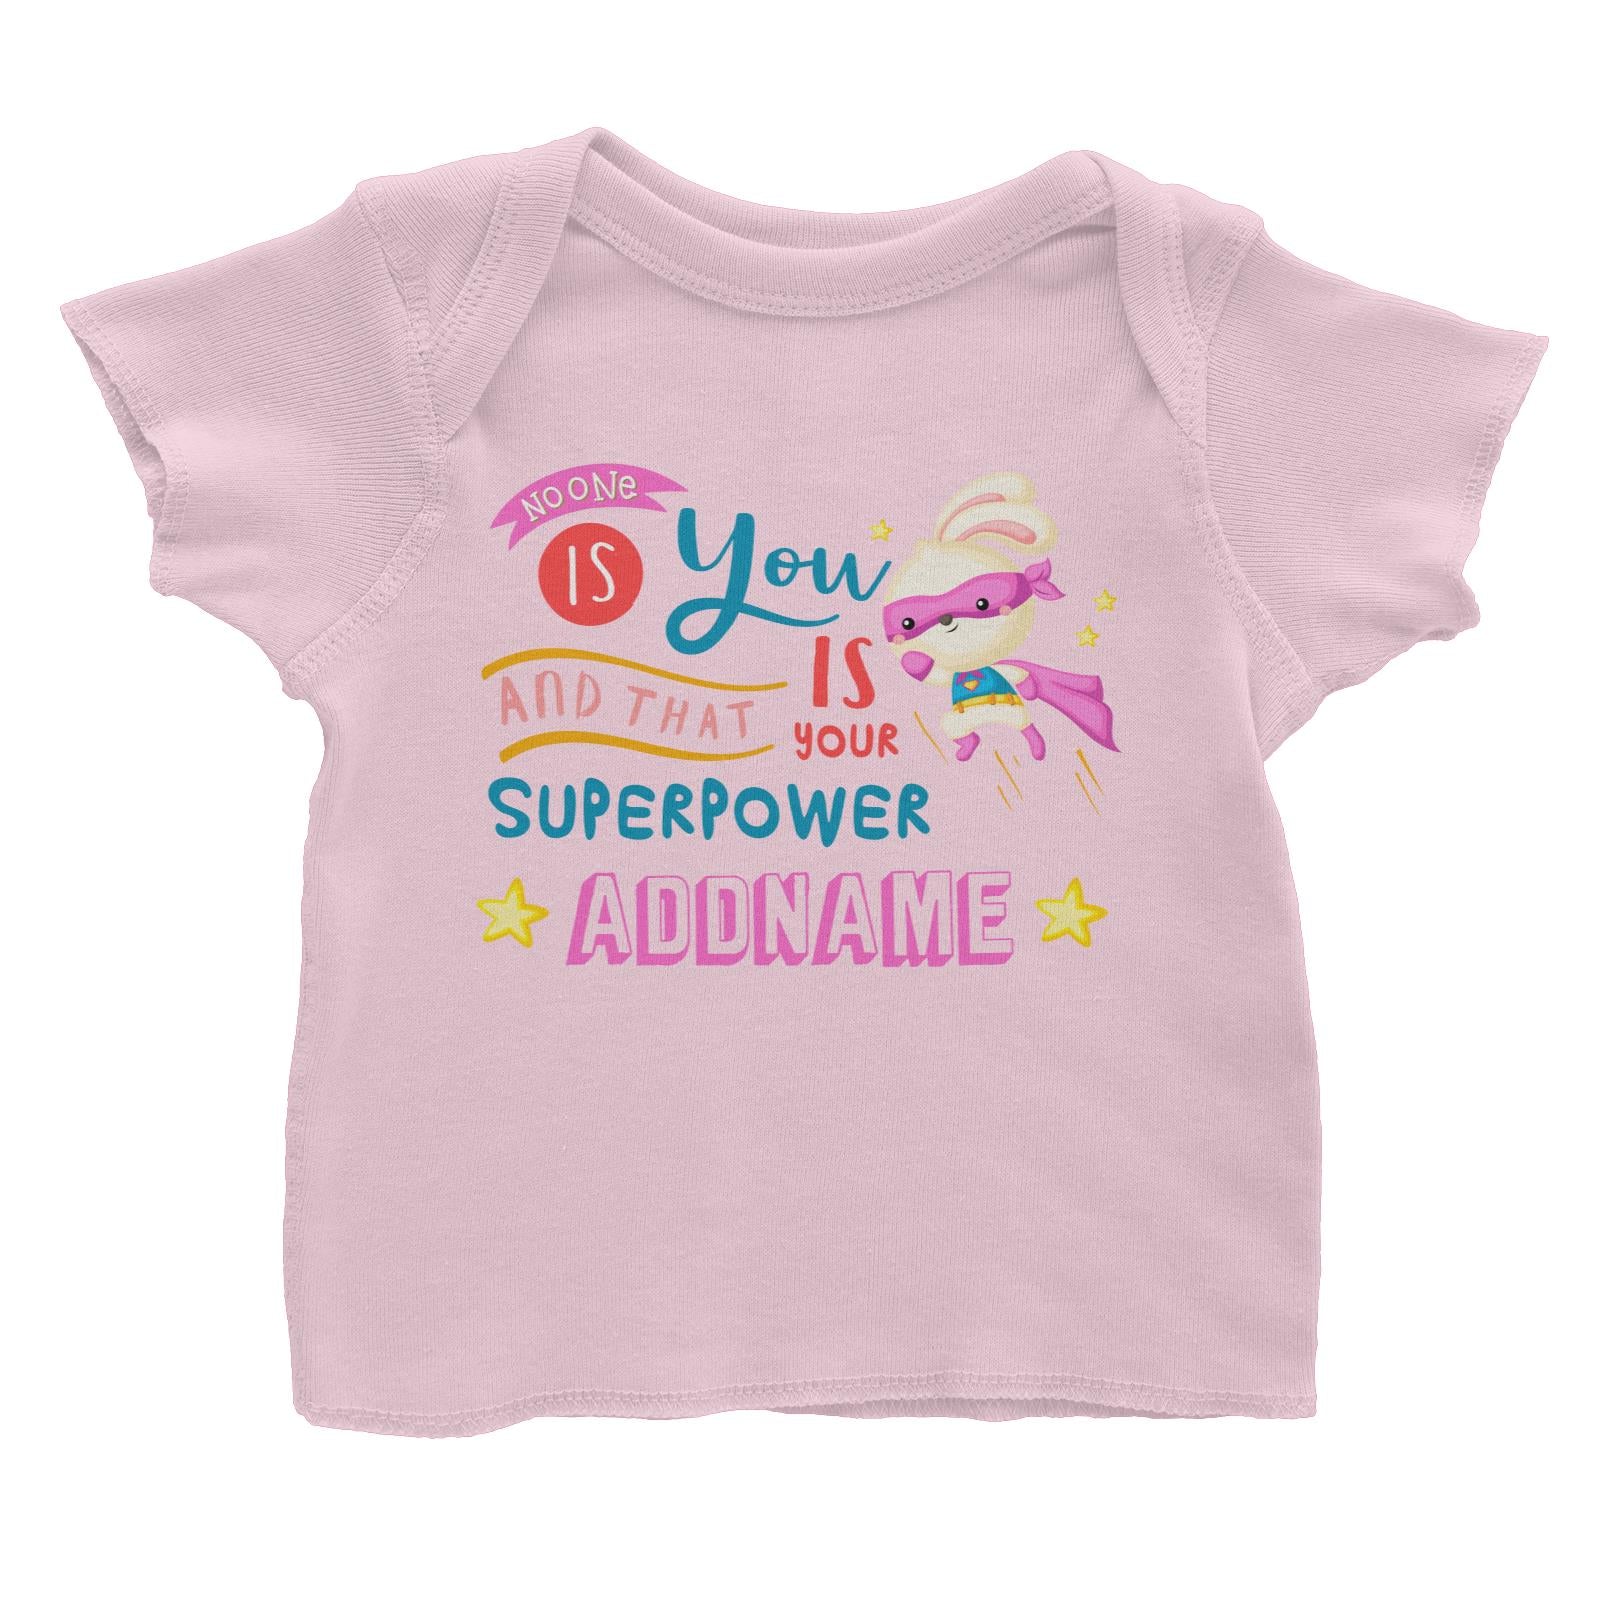 Children's Day Gift Series No One Is You And That Is Your Superpower Pink Addname Baby T-Shirt